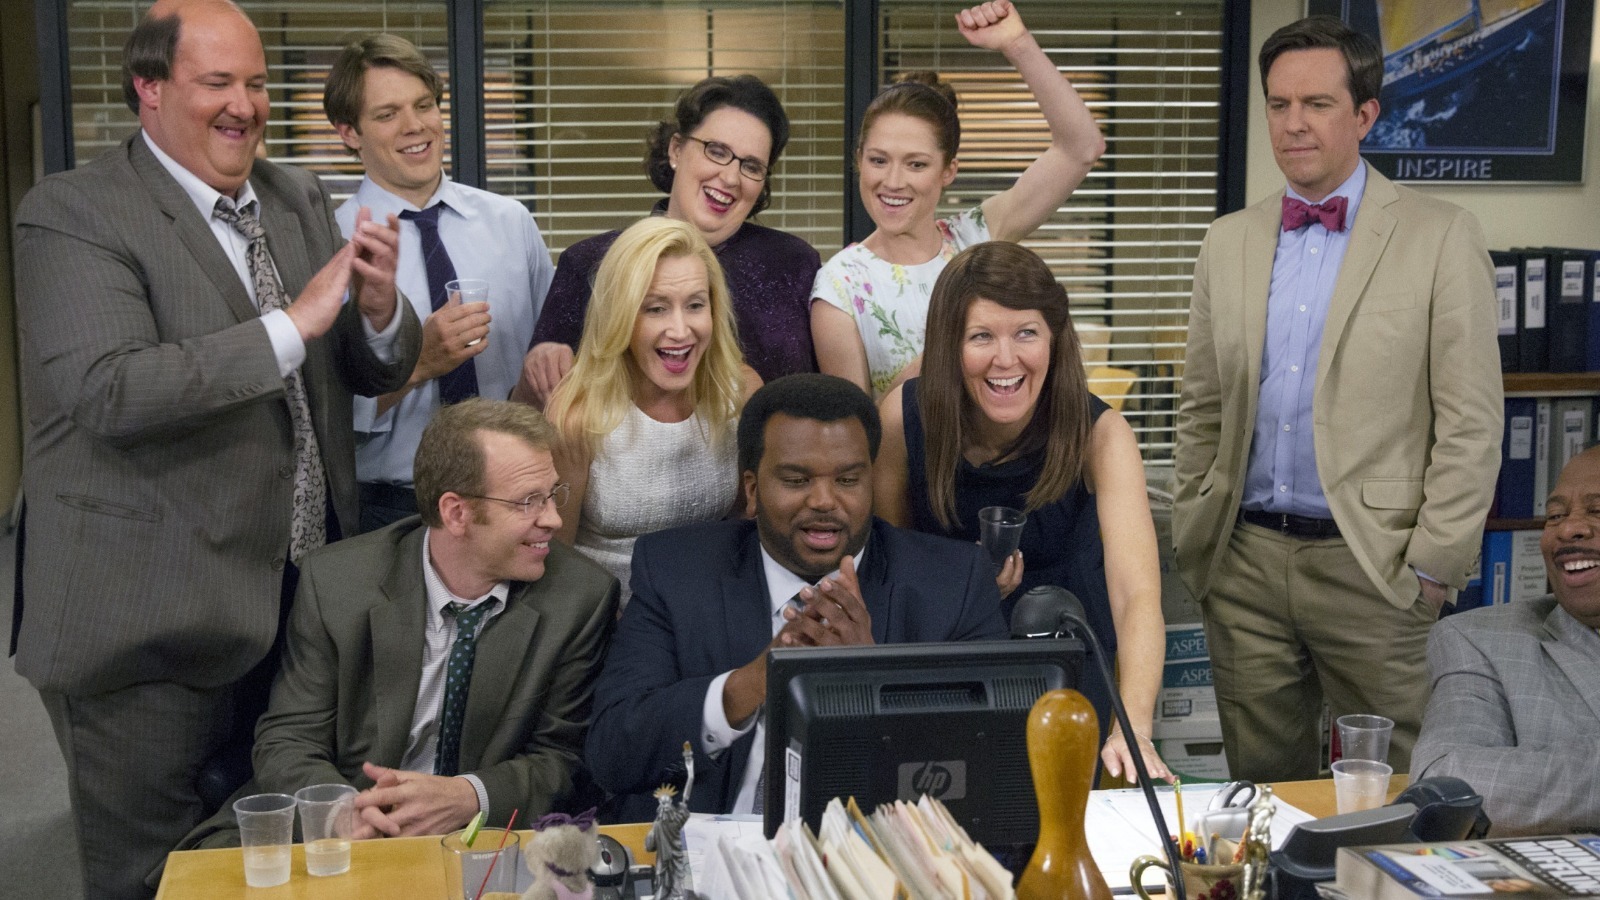 The 15 Funniest Moments In The Office, Ranked